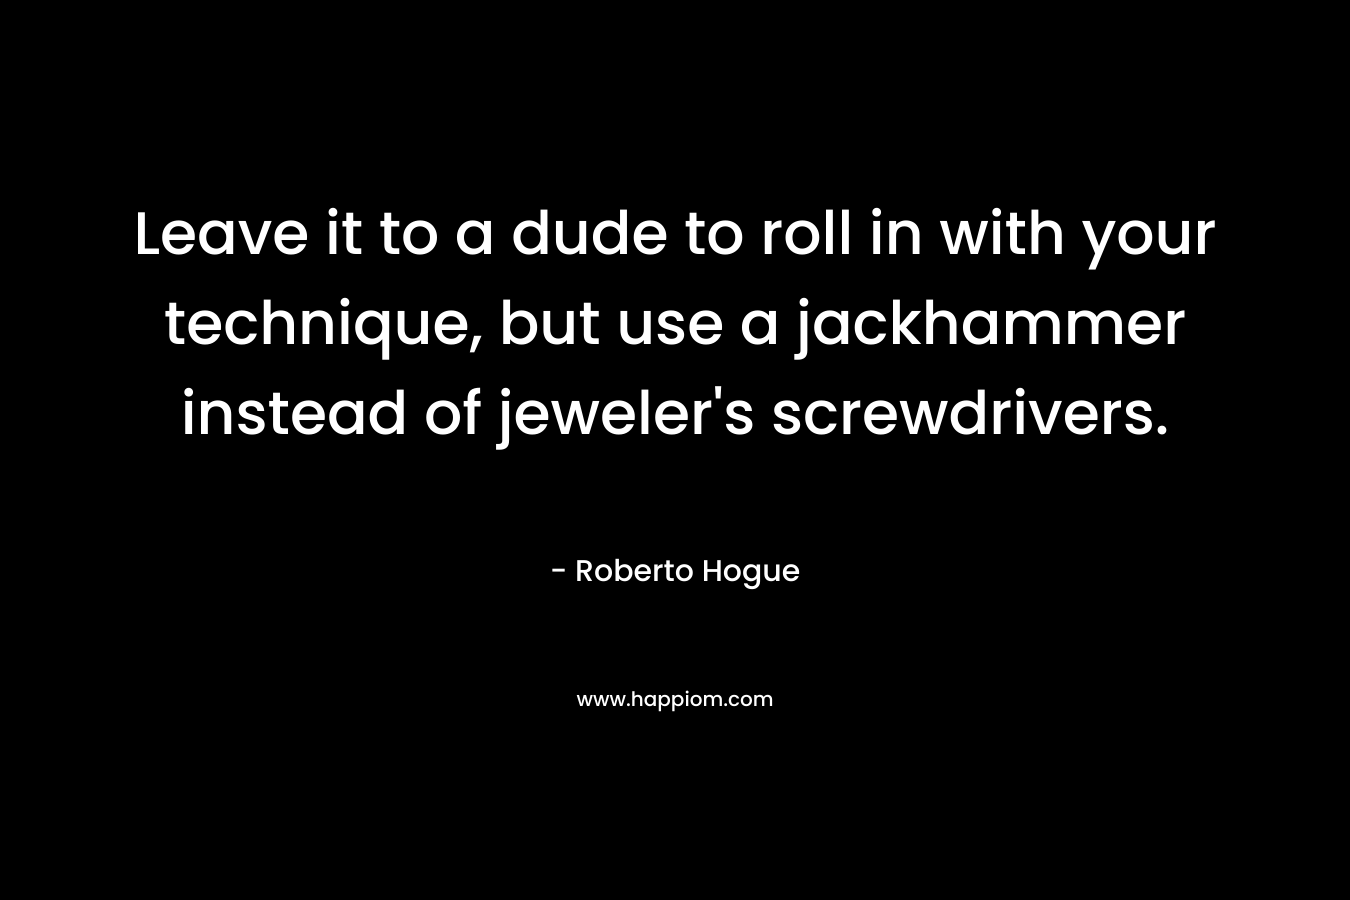 Leave it to a dude to roll in with your technique, but use a jackhammer instead of jeweler’s screwdrivers. – Roberto Hogue